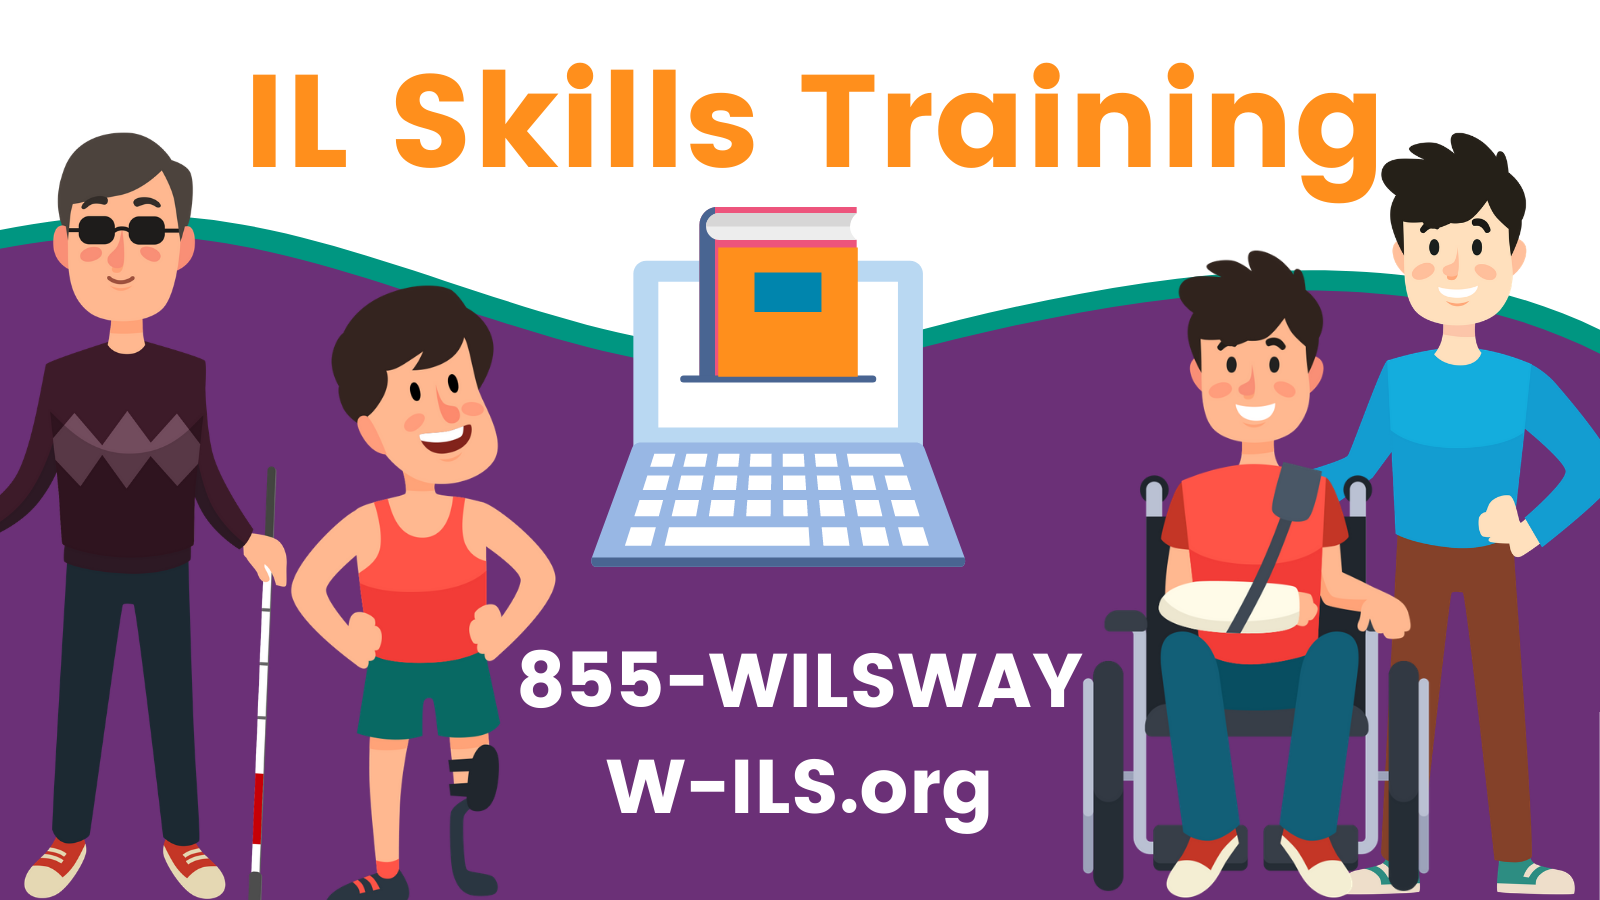 For WILS Independent Living Skills Training, call 855-WILSWAY or visit W-ILS.org